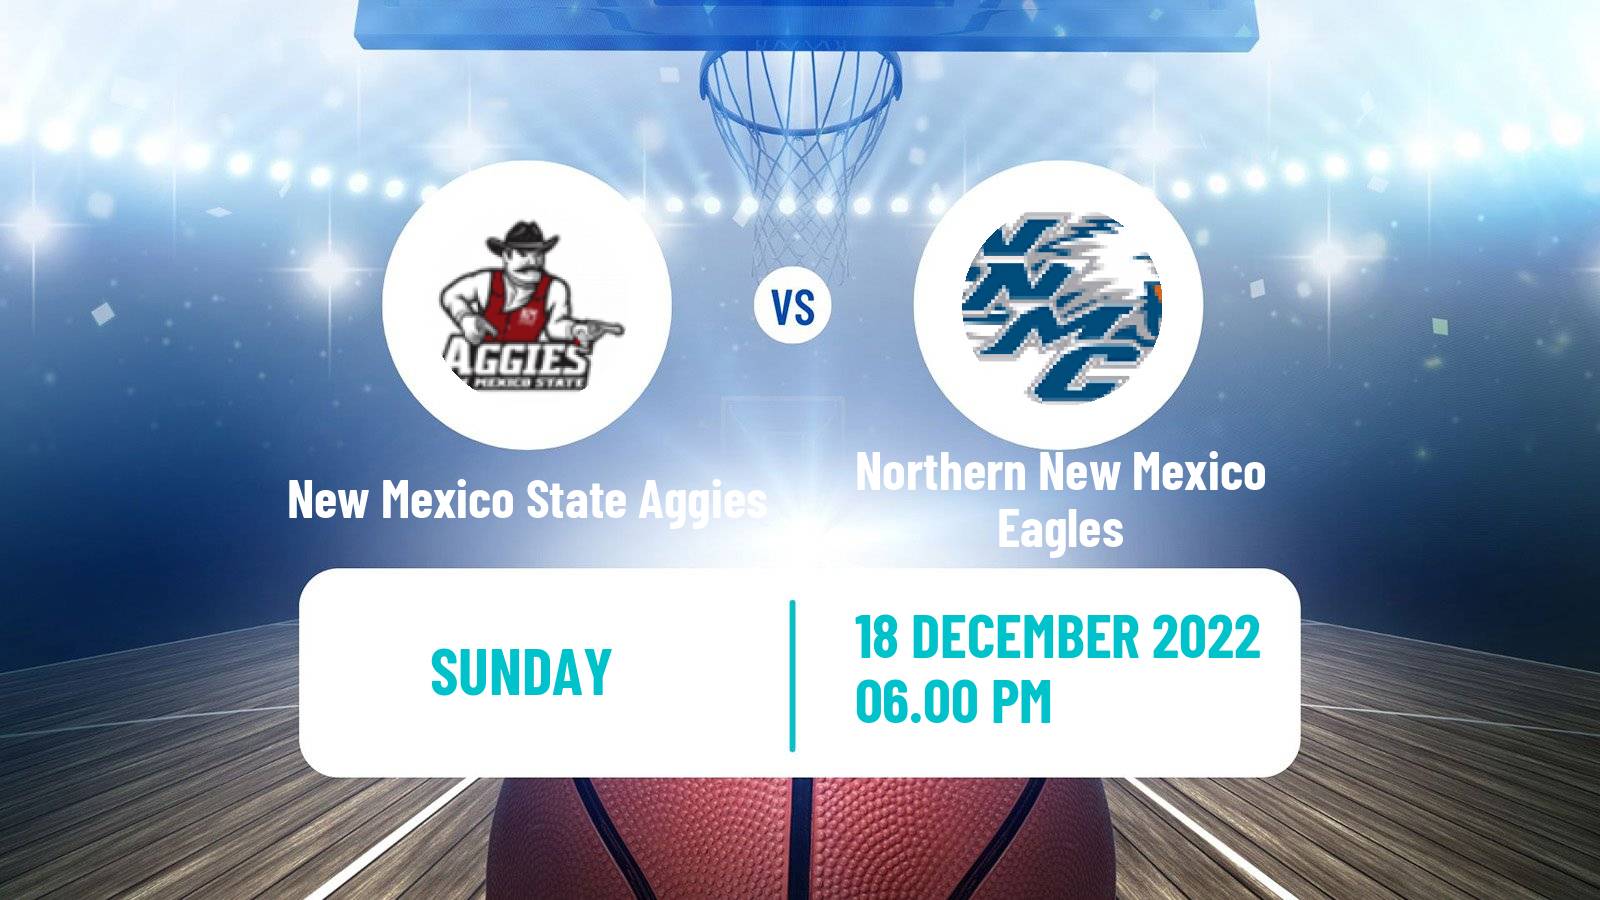 Basketball NCAA College Basketball New Mexico State Aggies - Northern New Mexico Eagles